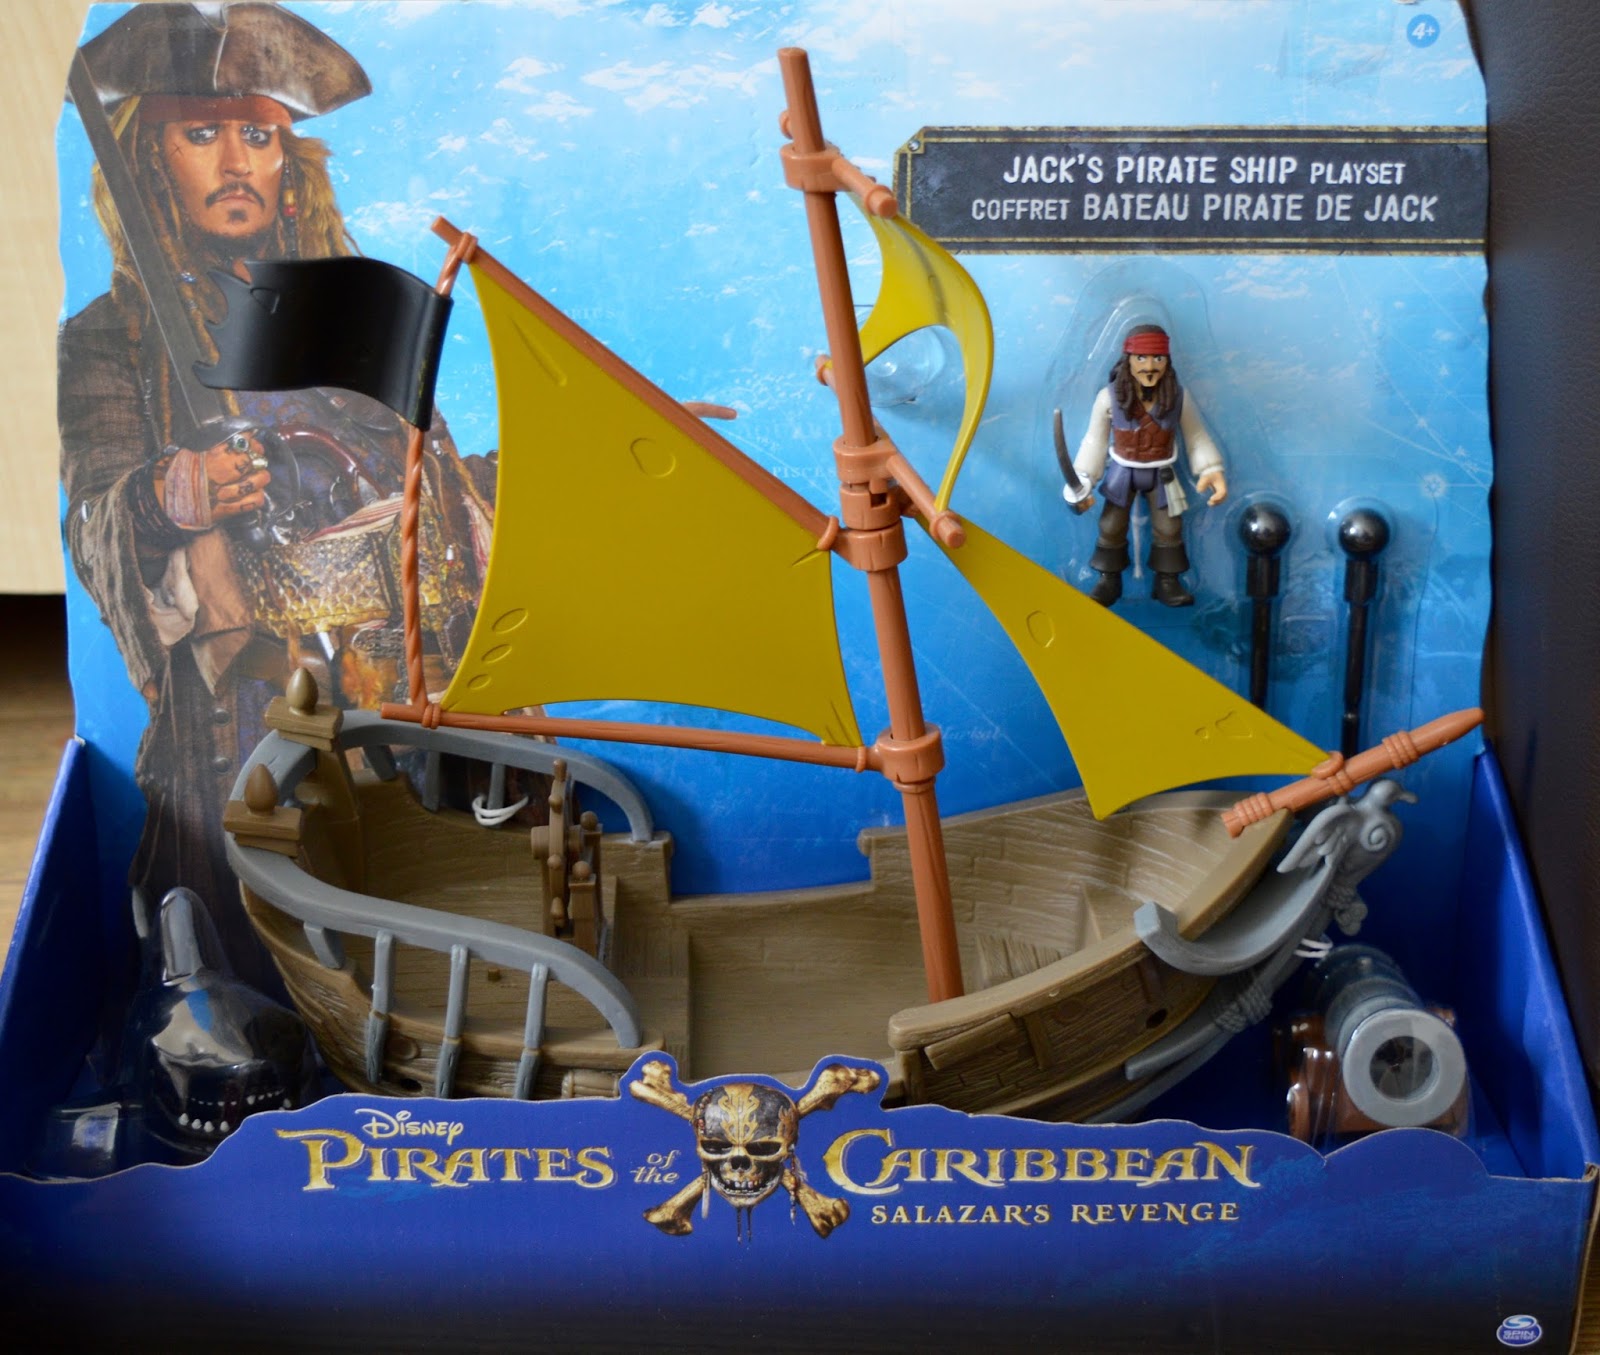 Pirates of the Caribbean Playsets | We Review Jack Sparrow's Pirate Ship and Battle Figures by Spin Master